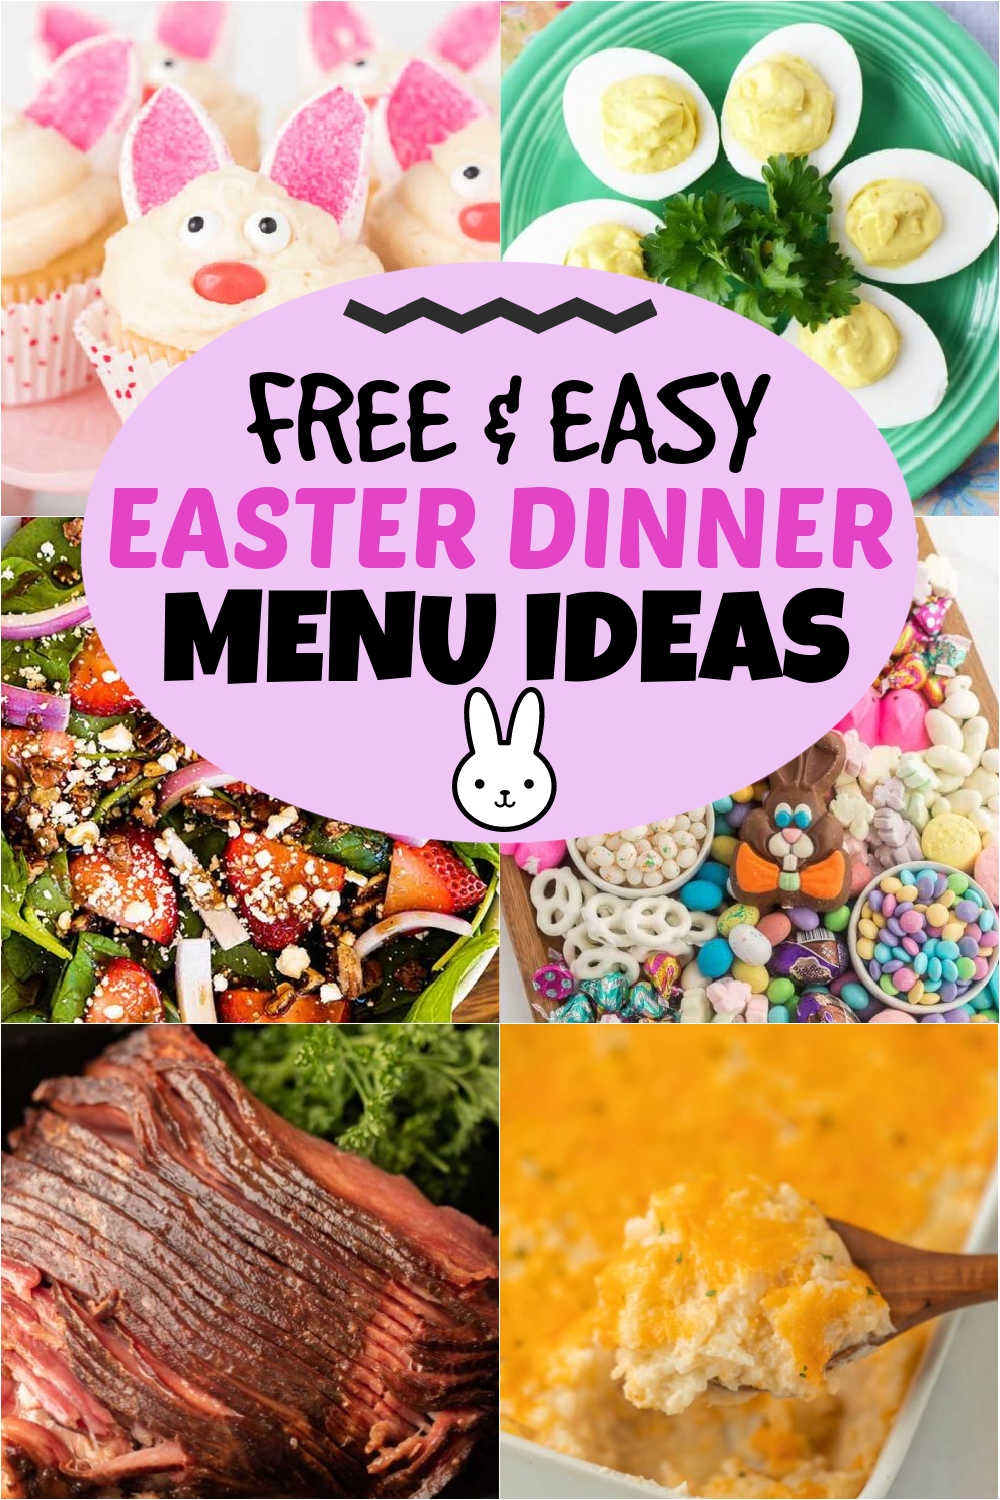 Easter Menu Ideas and Recipes - The Best Easter Dinner recipes